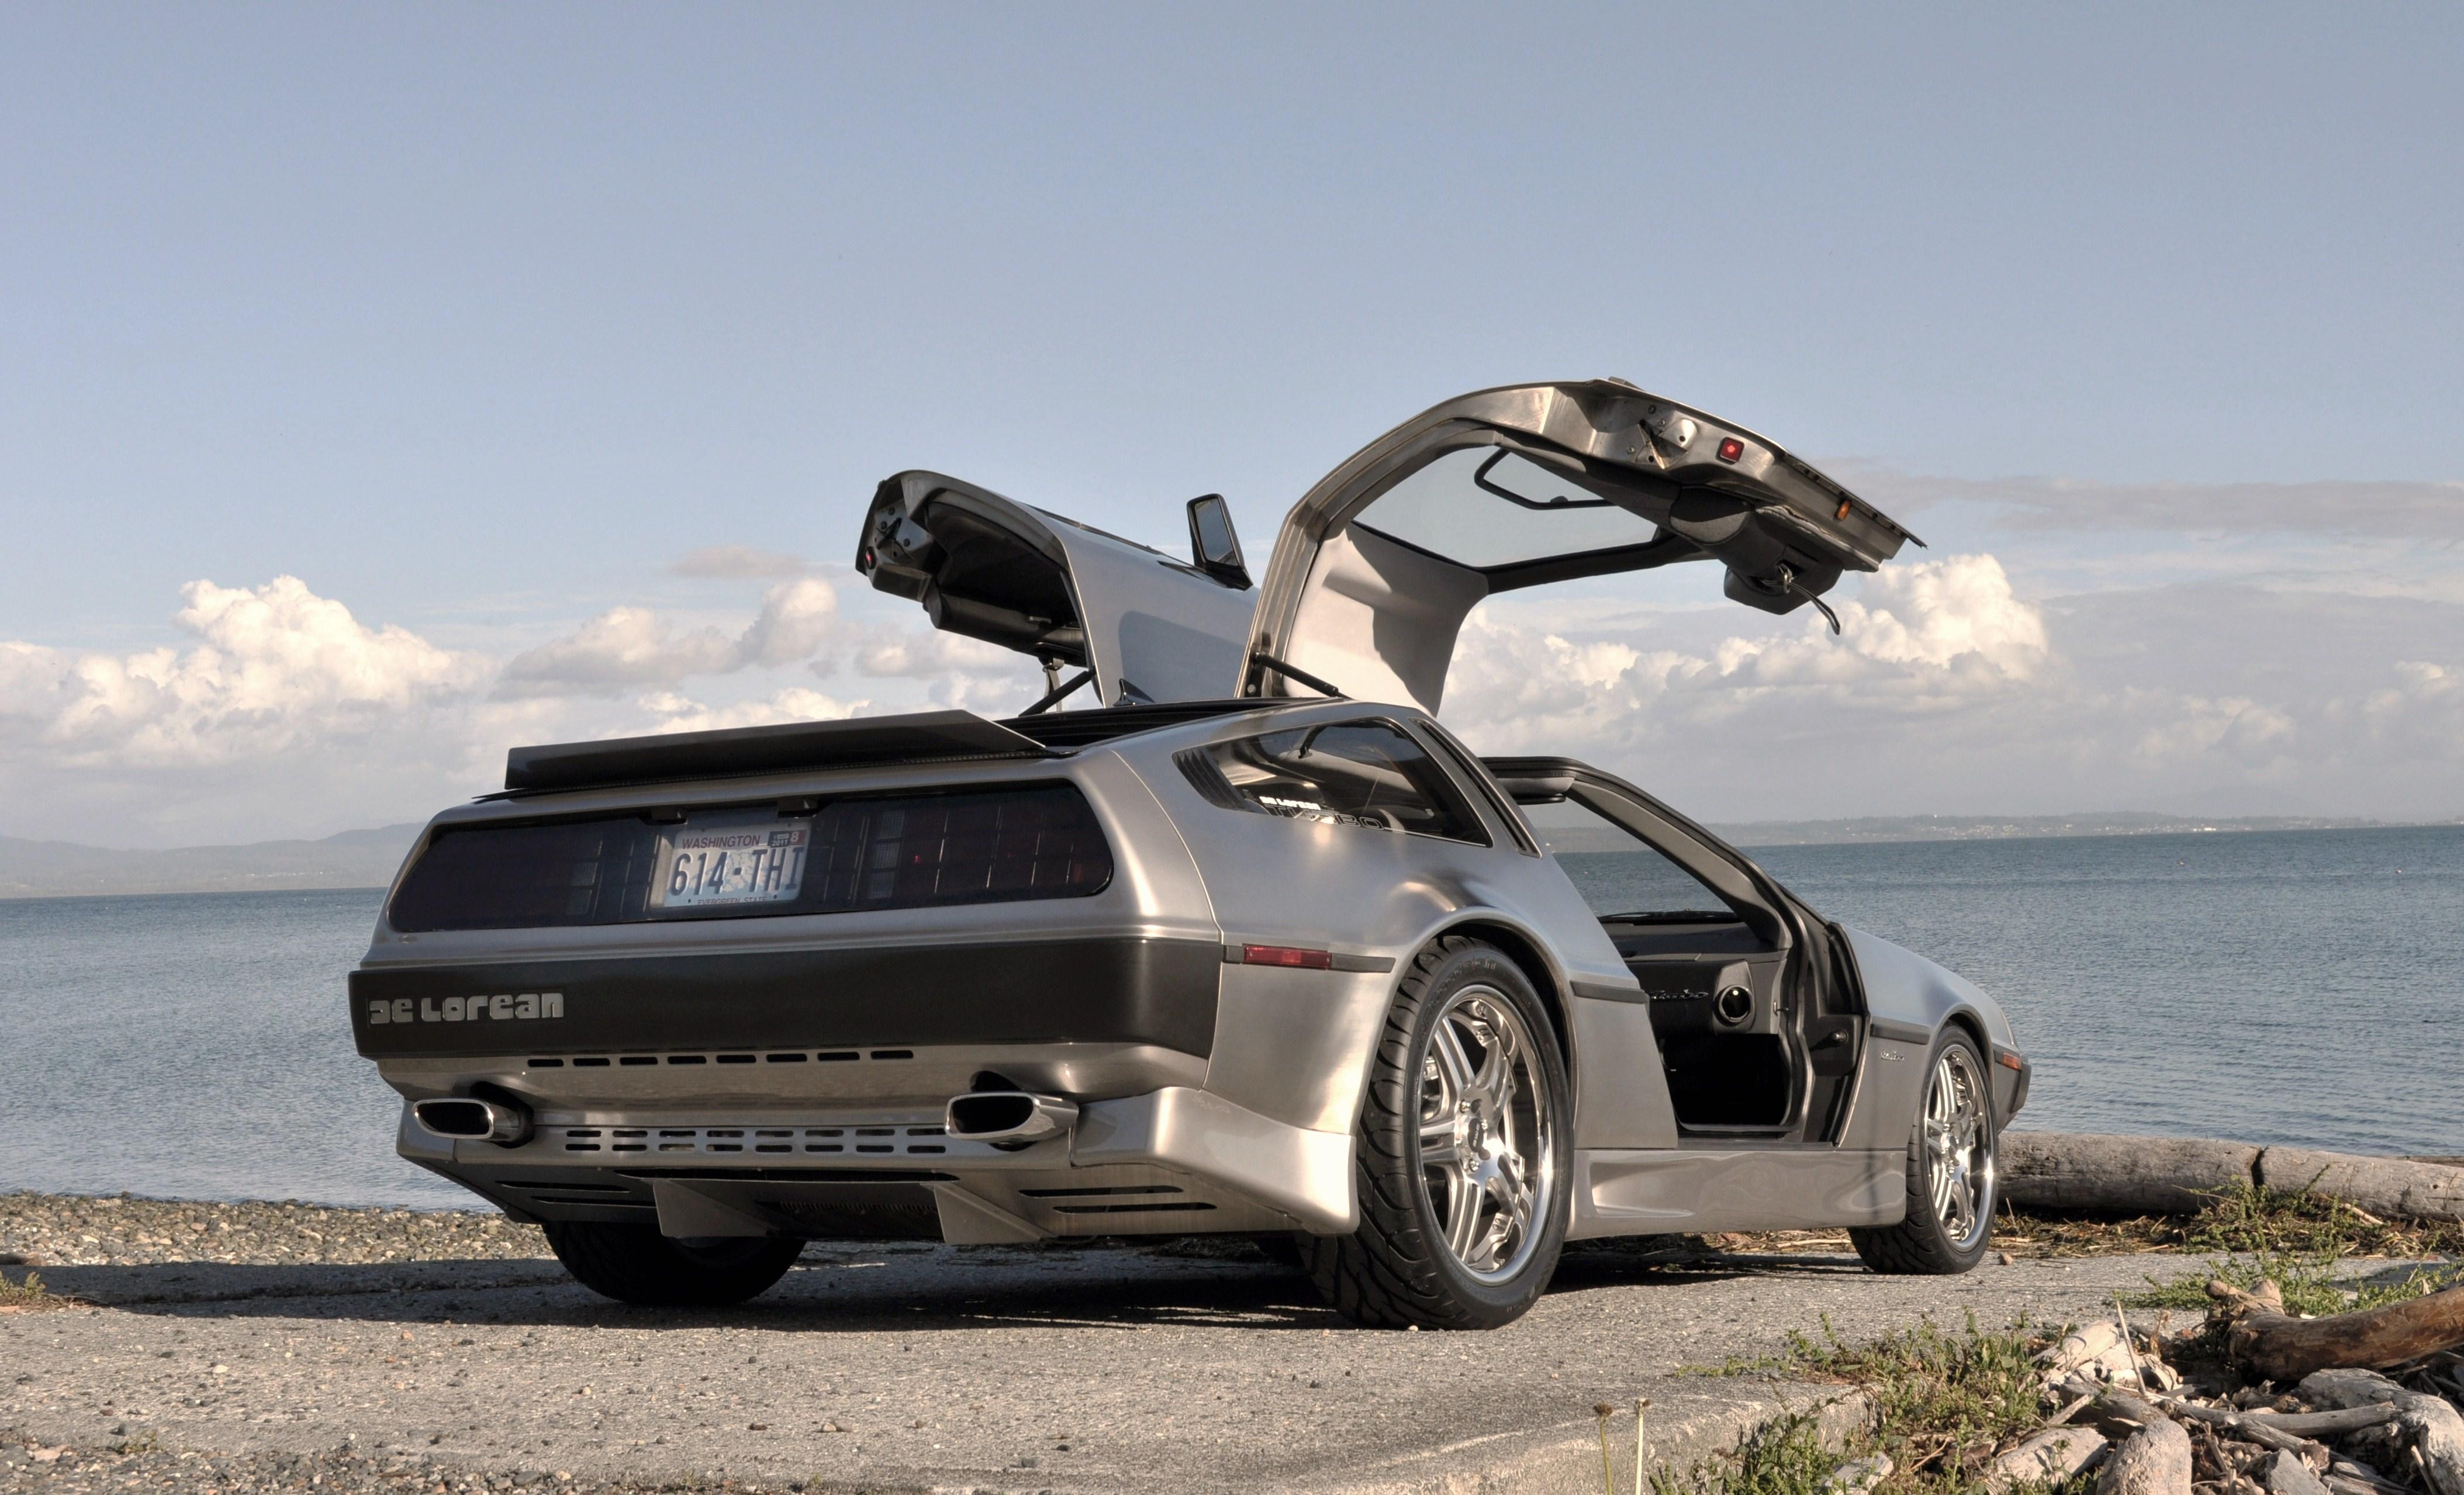 More than thirty years old, and still capturing imaginations. (Picture courtesty What Price a DeLorean-carphotos.cardomain.com).